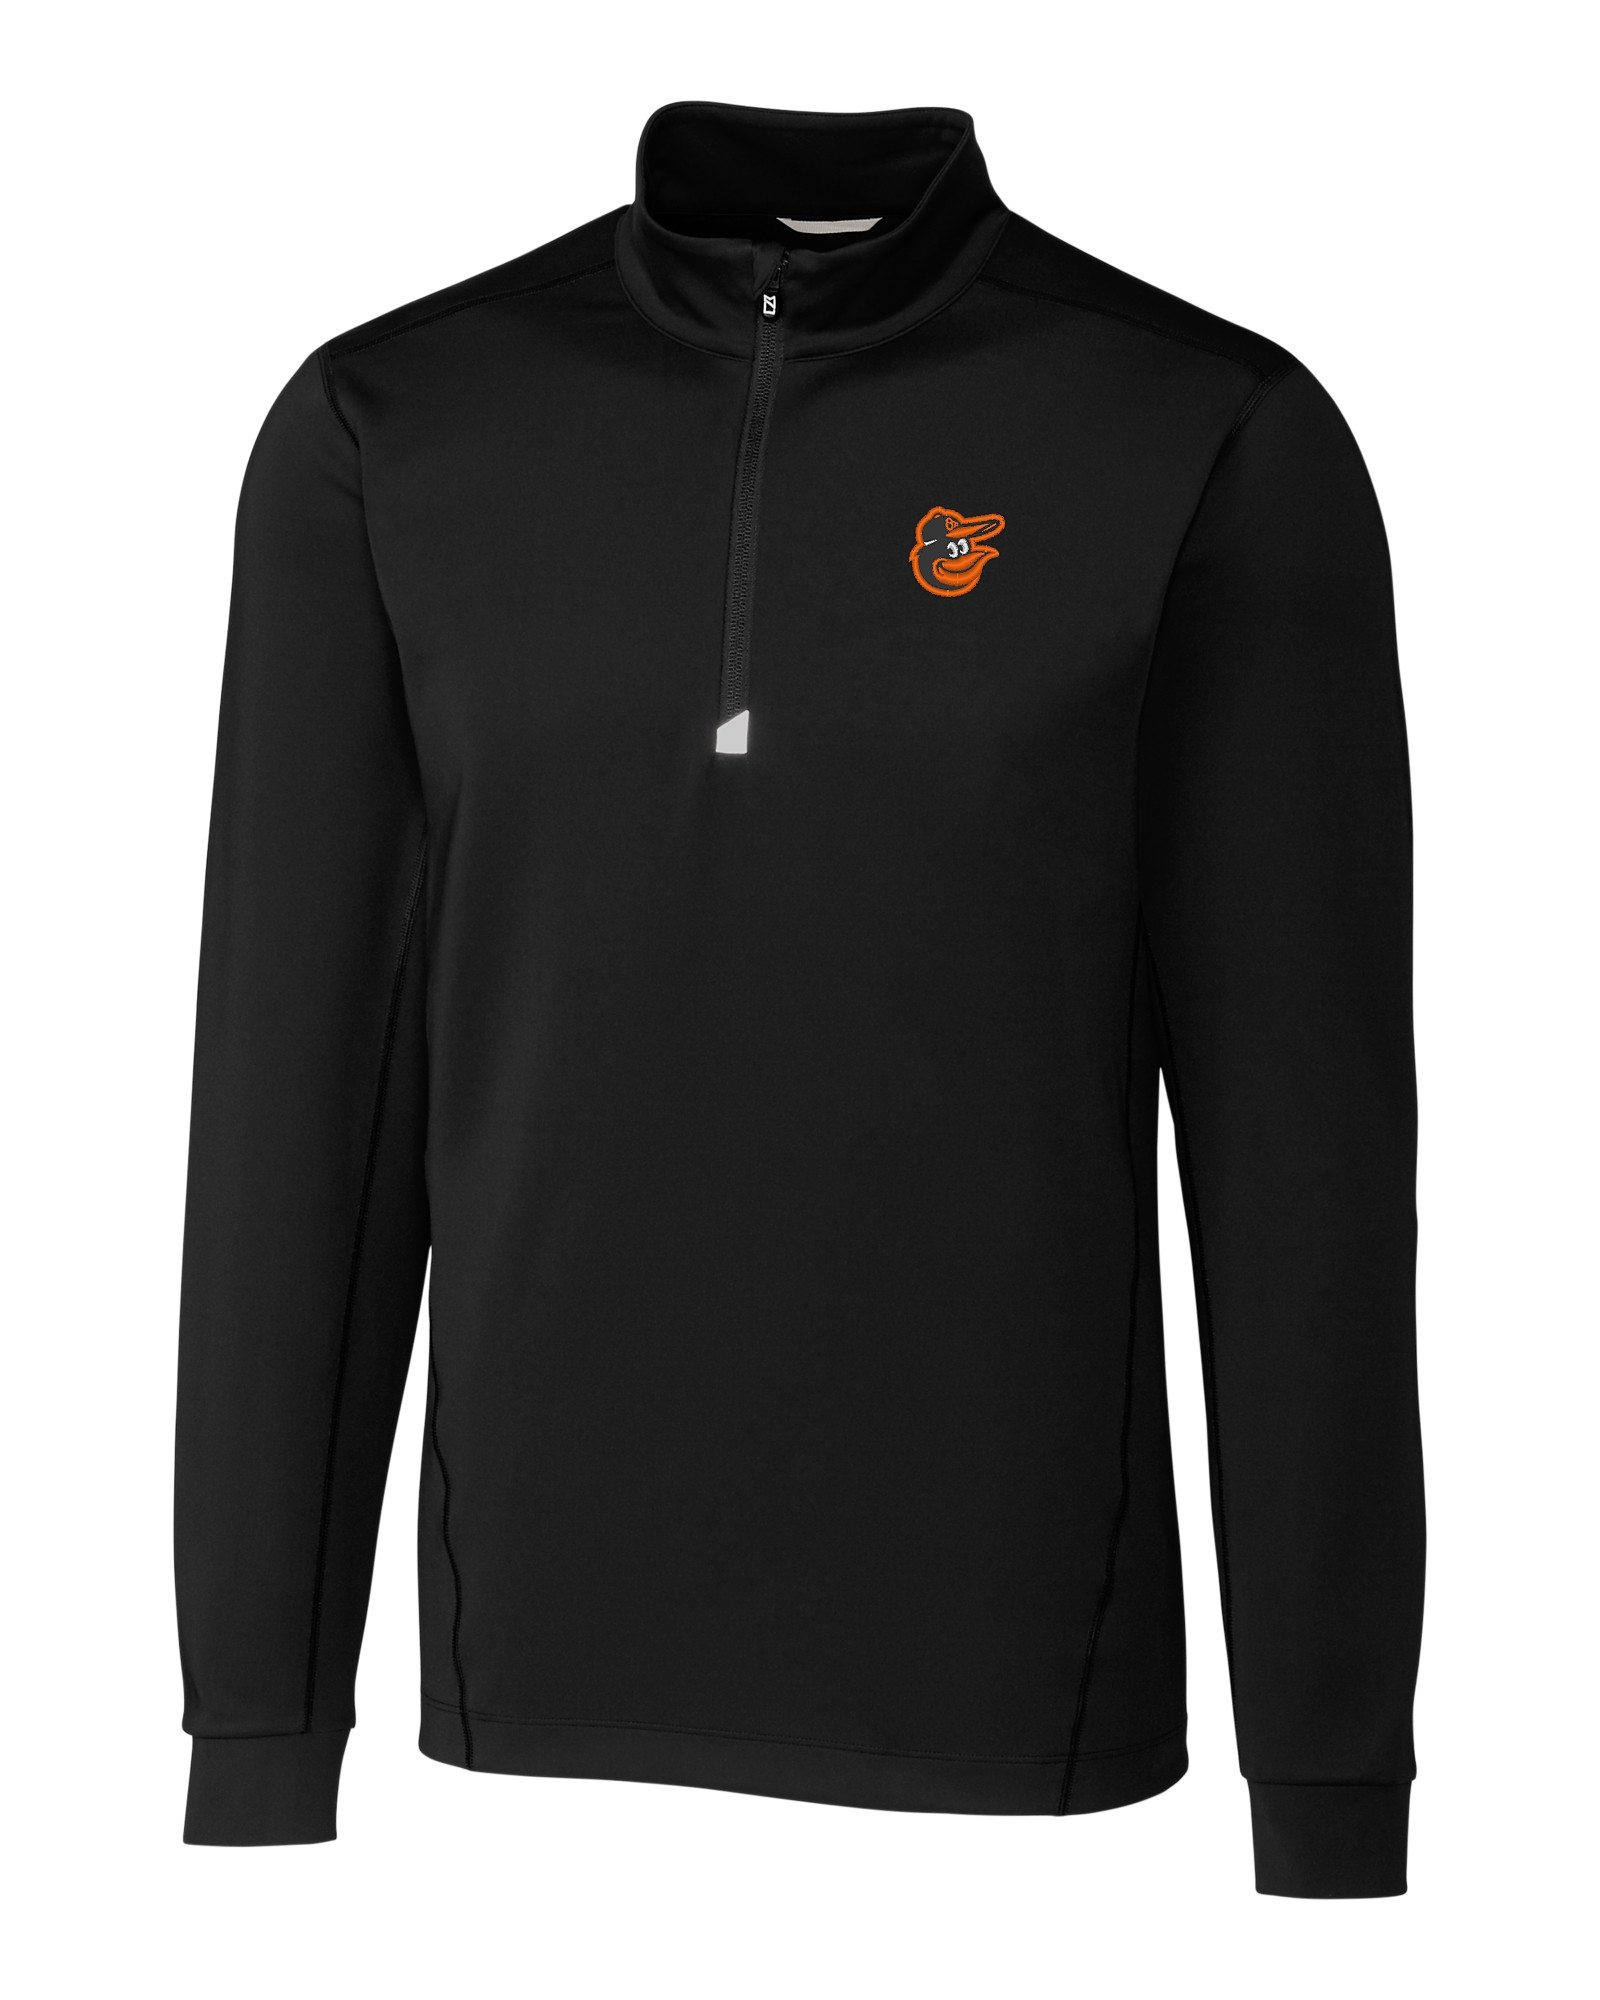 Baltimore Orioles Cutter & Buck Traverse Stretch Quarter Zip Mens Big and Tall Pullover